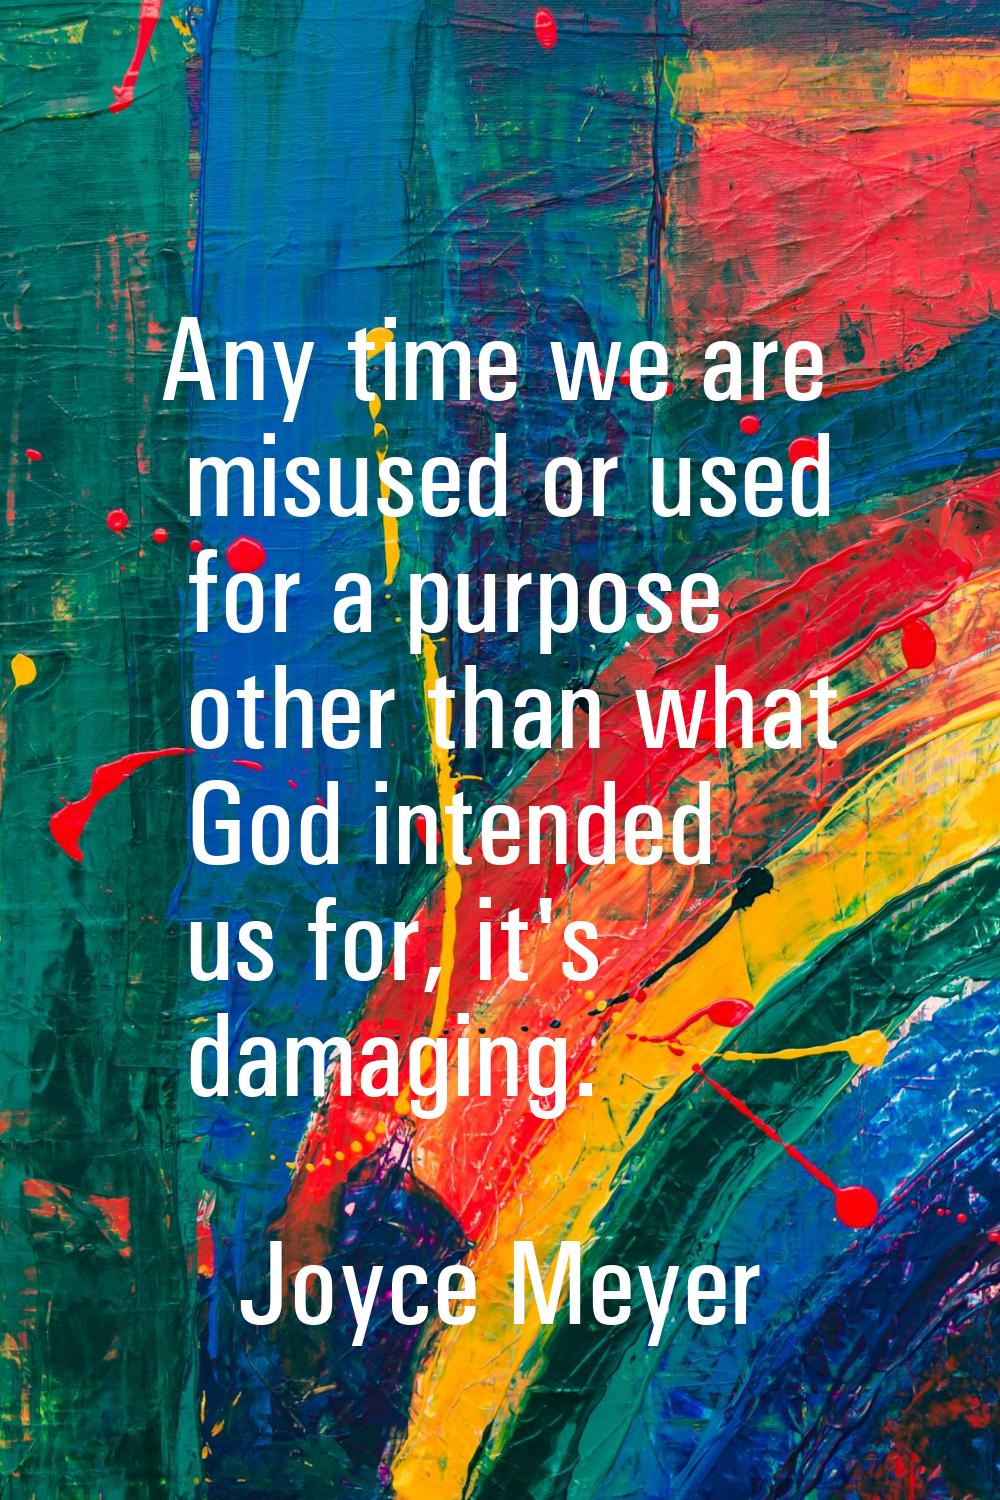 Any time we are misused or used for a purpose other than what God intended us for, it's damaging.